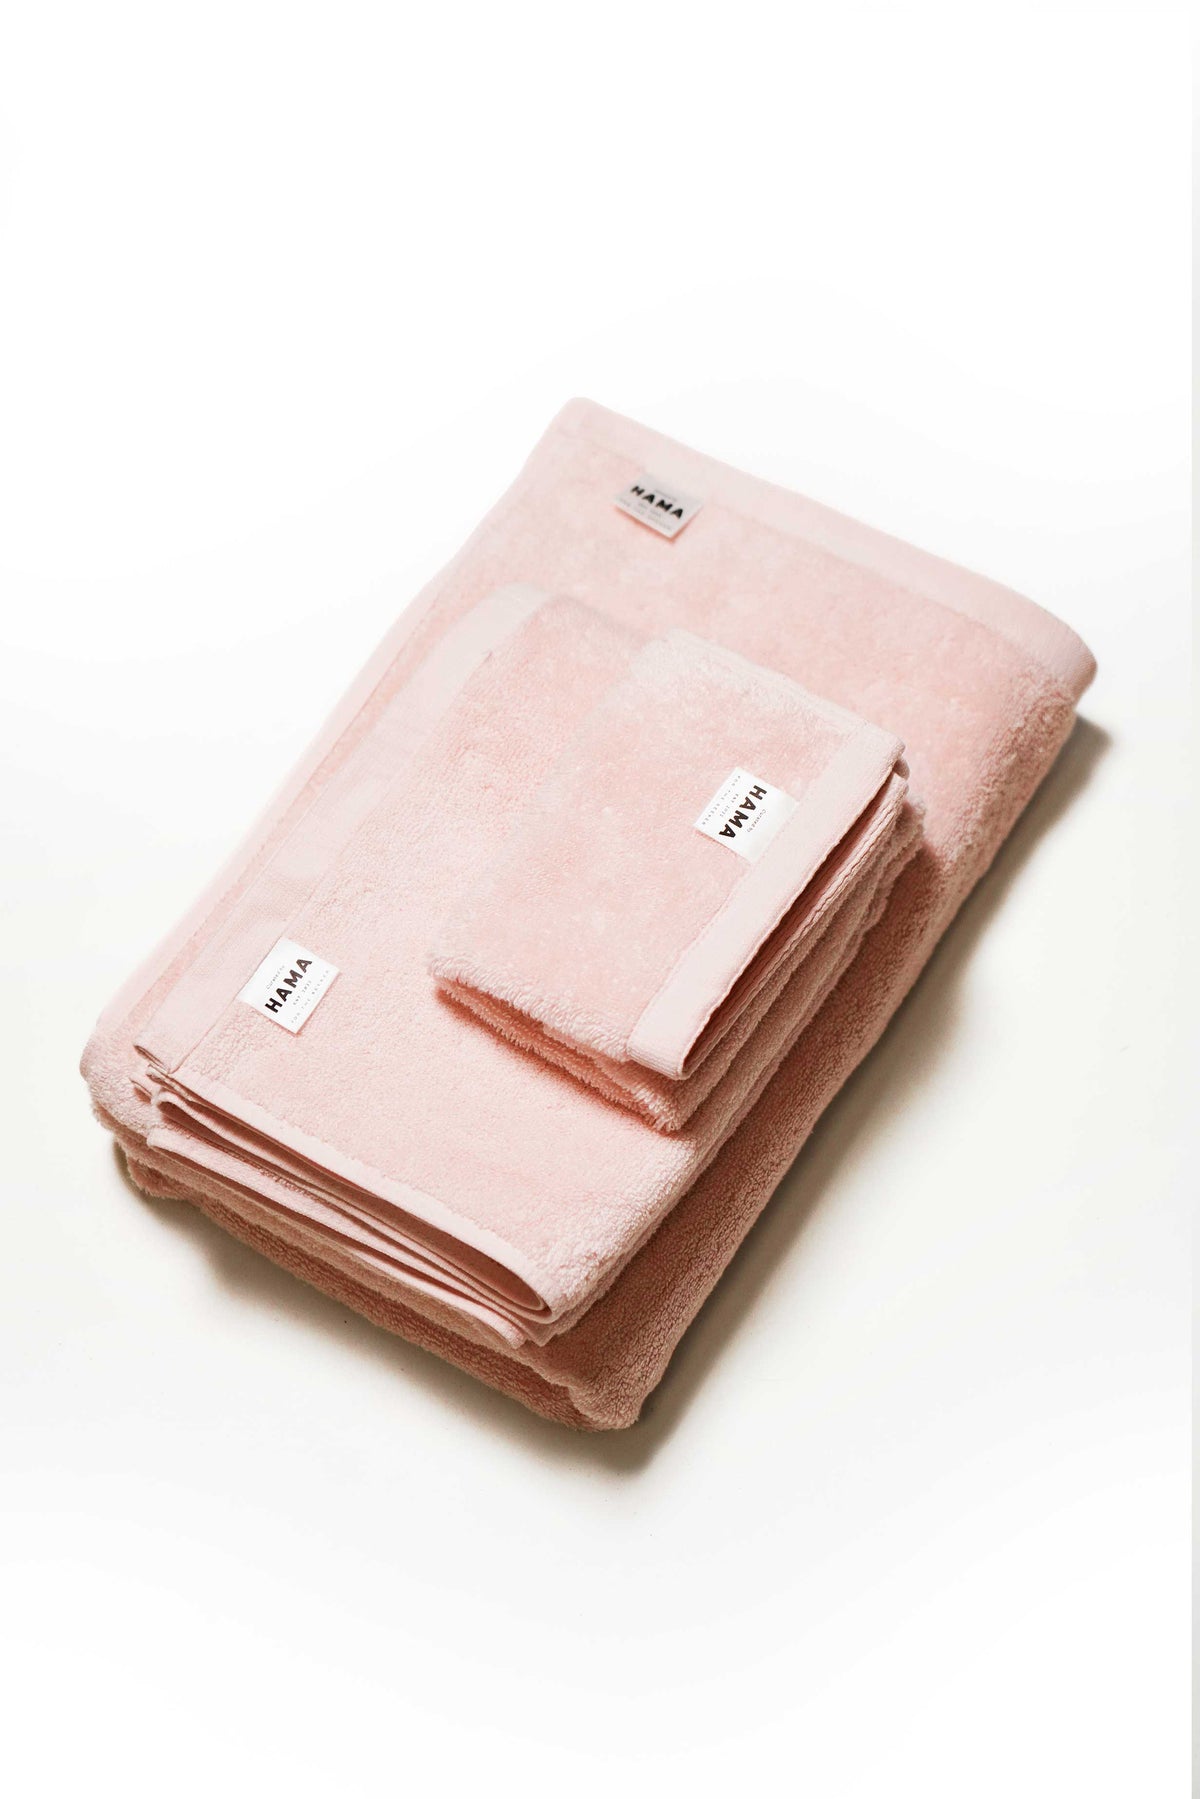 Danube, Classic Cotton Face Cloth in Morning Pink